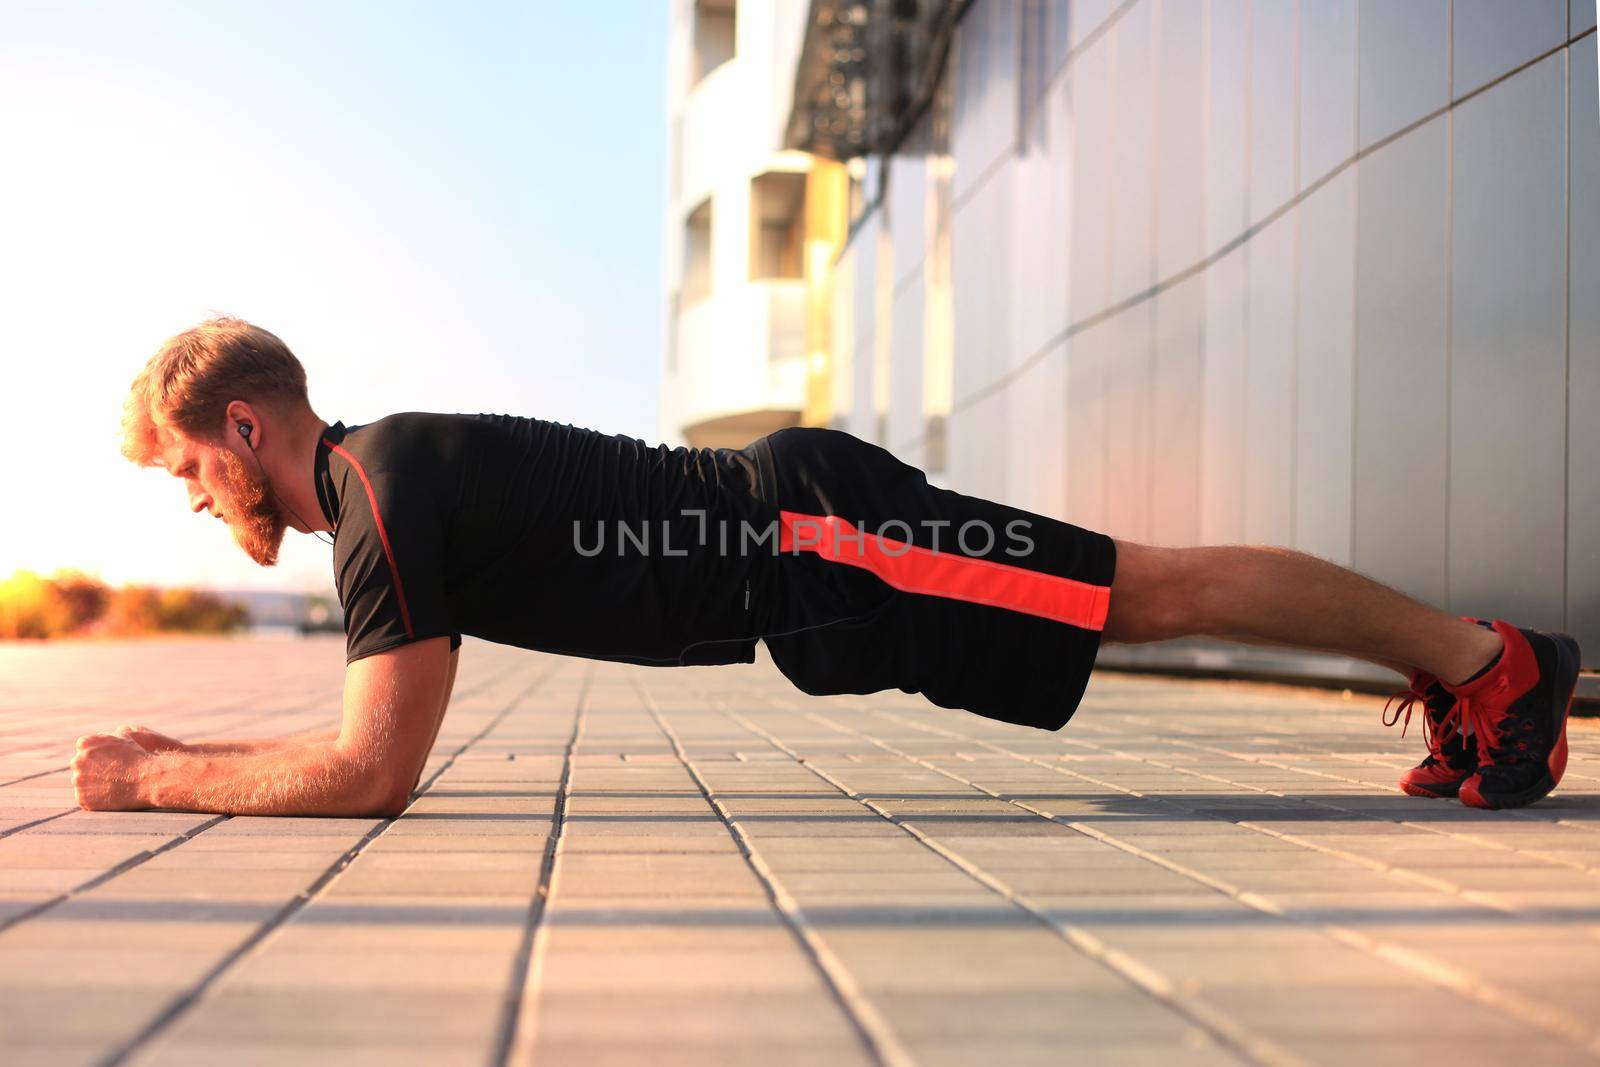 Handsome young man in sports clothing keeping plank position while exercising outdoors